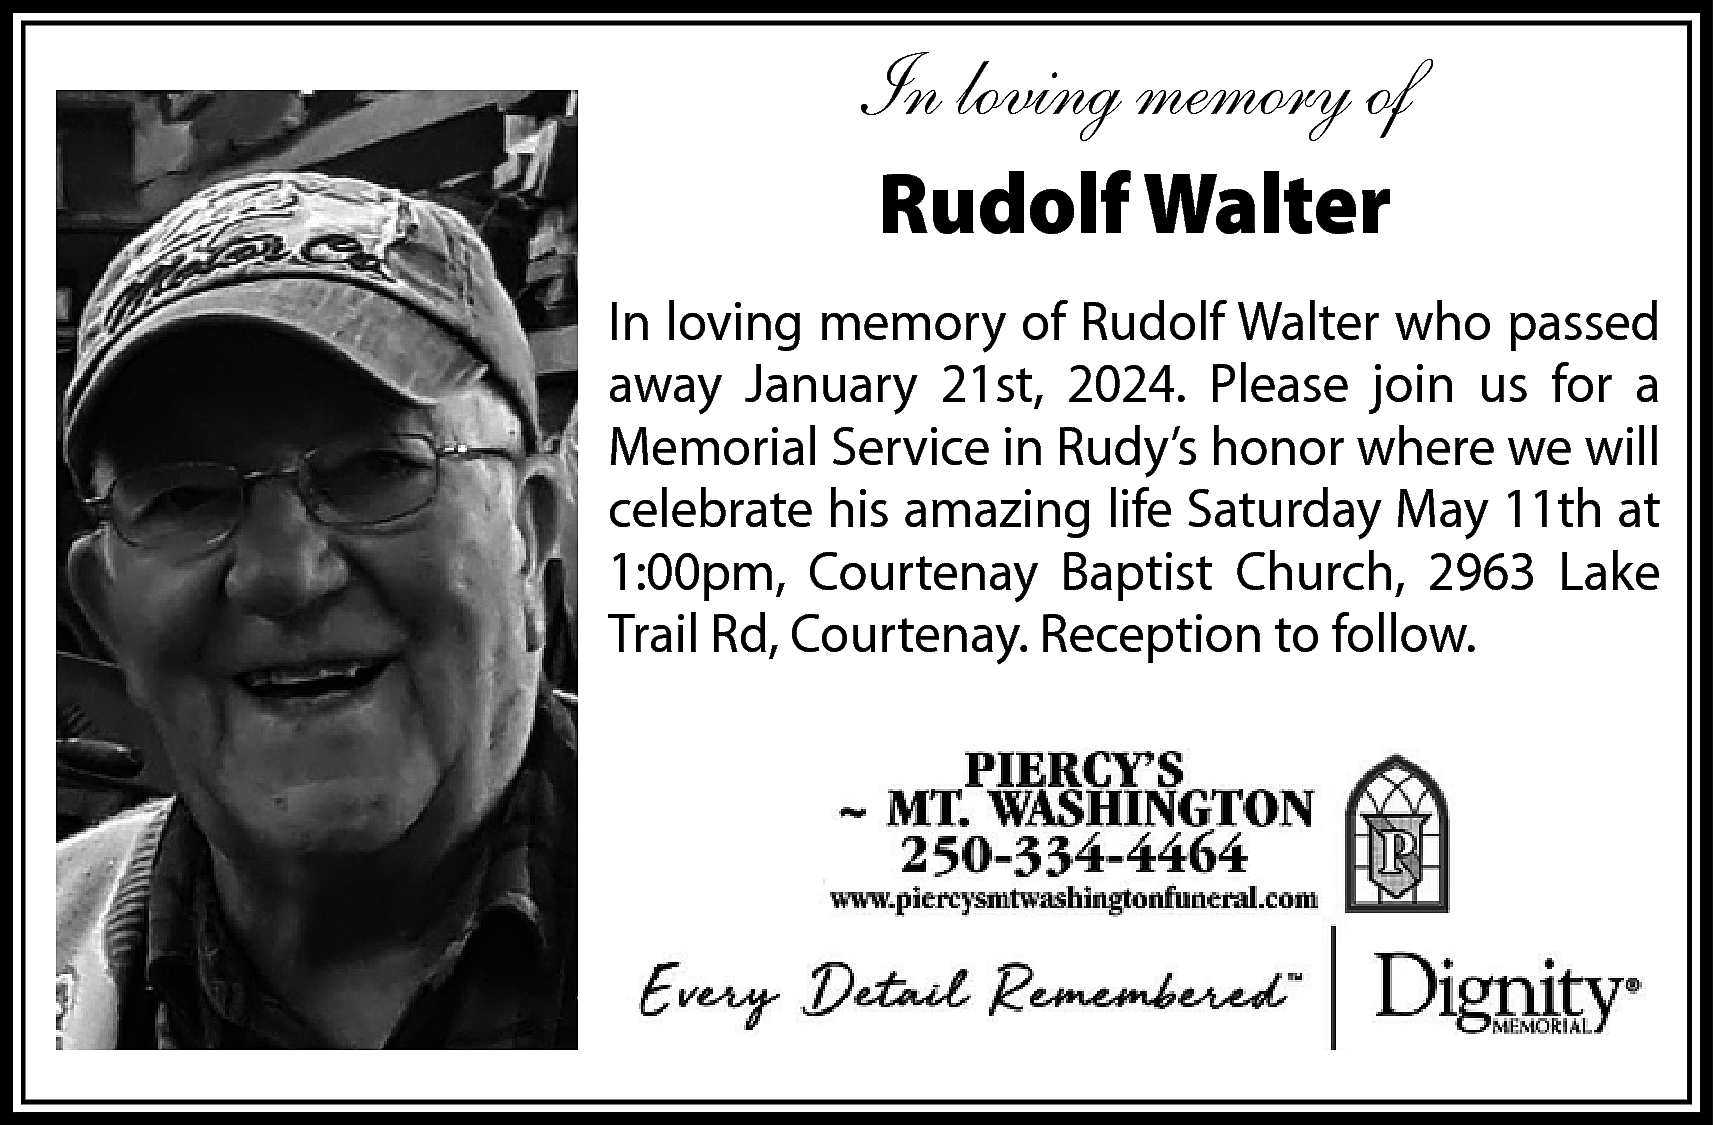 In loving memory of <br>Rudolf  In loving memory of  Rudolf Walter  In loving memory of Rudolf Walter who passed  away January 21st, 2024. Please join us for a  Memorial Service in Rudy’s honor where we will  celebrate his amazing life Saturday May 11th at  1:00pm, Courtenay Baptist Church, 2963 Lake  Trail Rd, Courtenay. Reception to follow.    